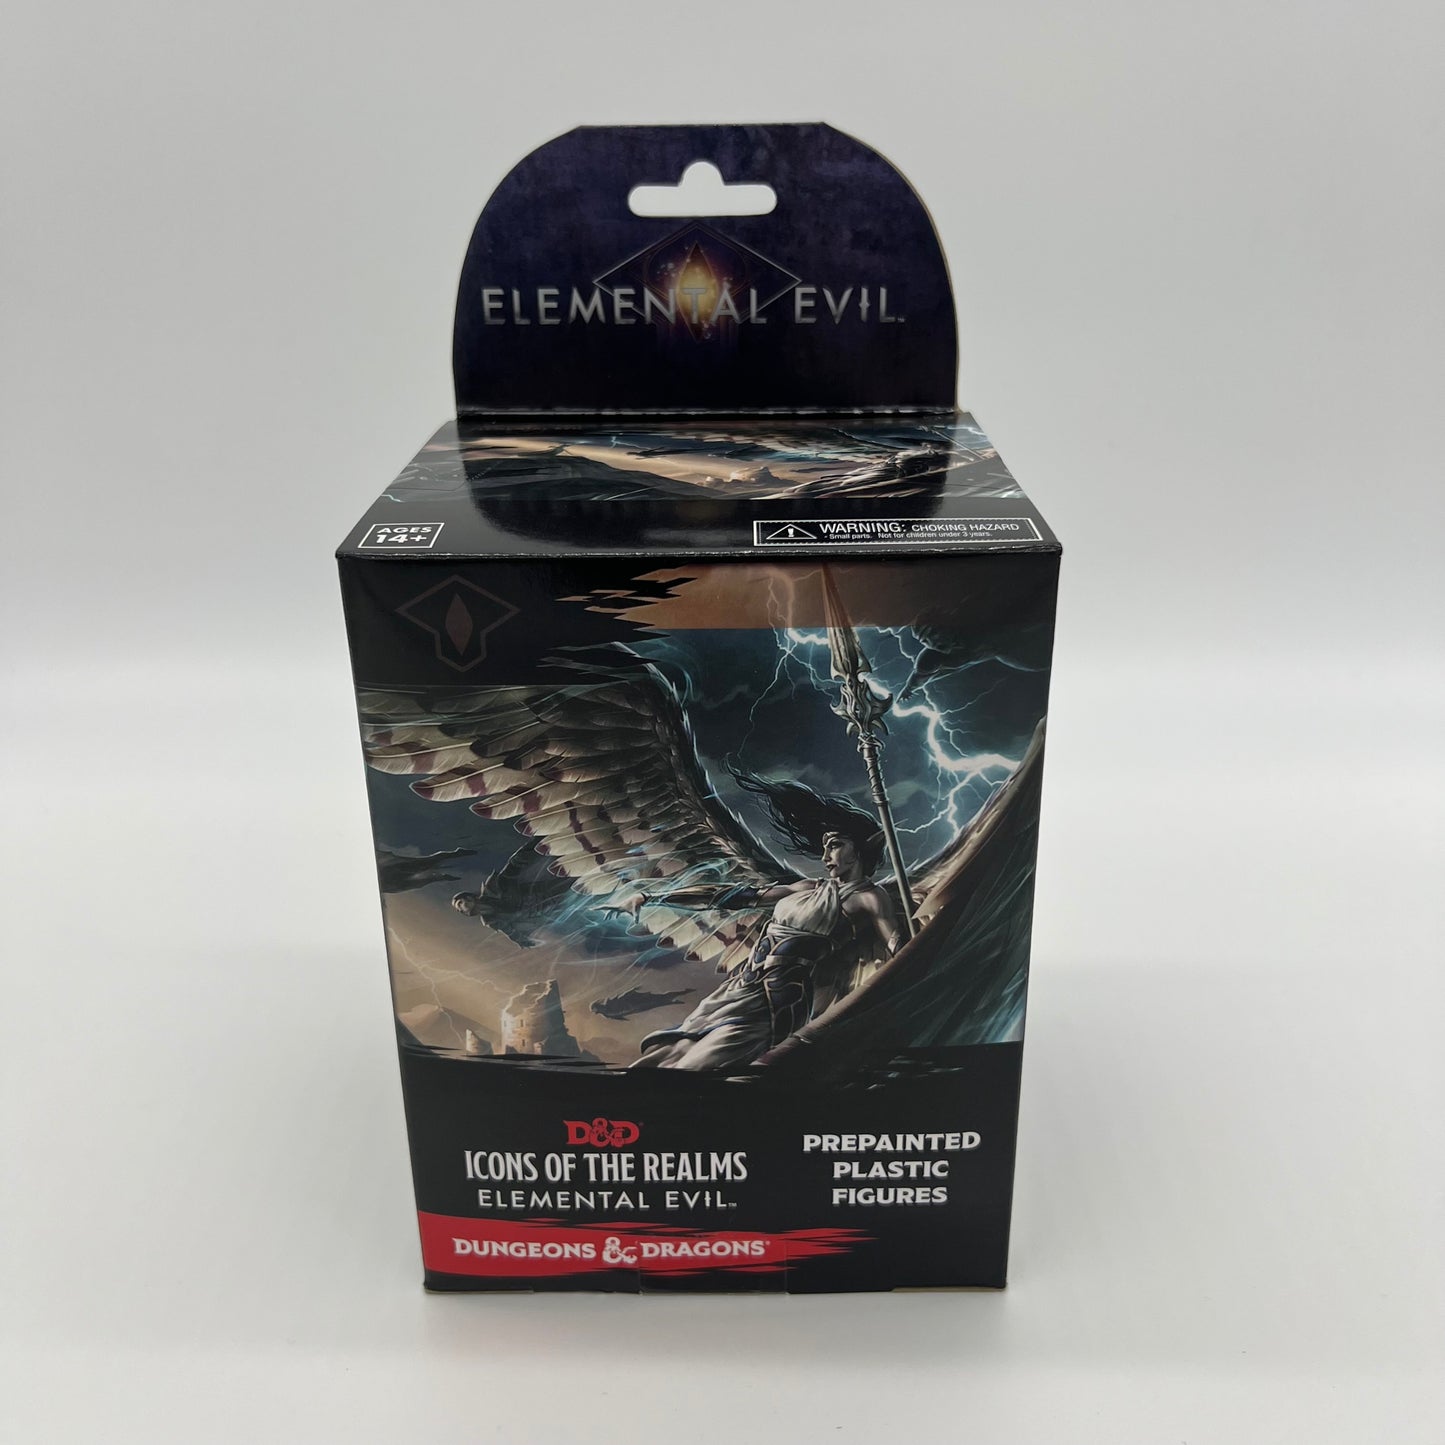 D&D Icons of the Realms: Elemental Evil blind booster